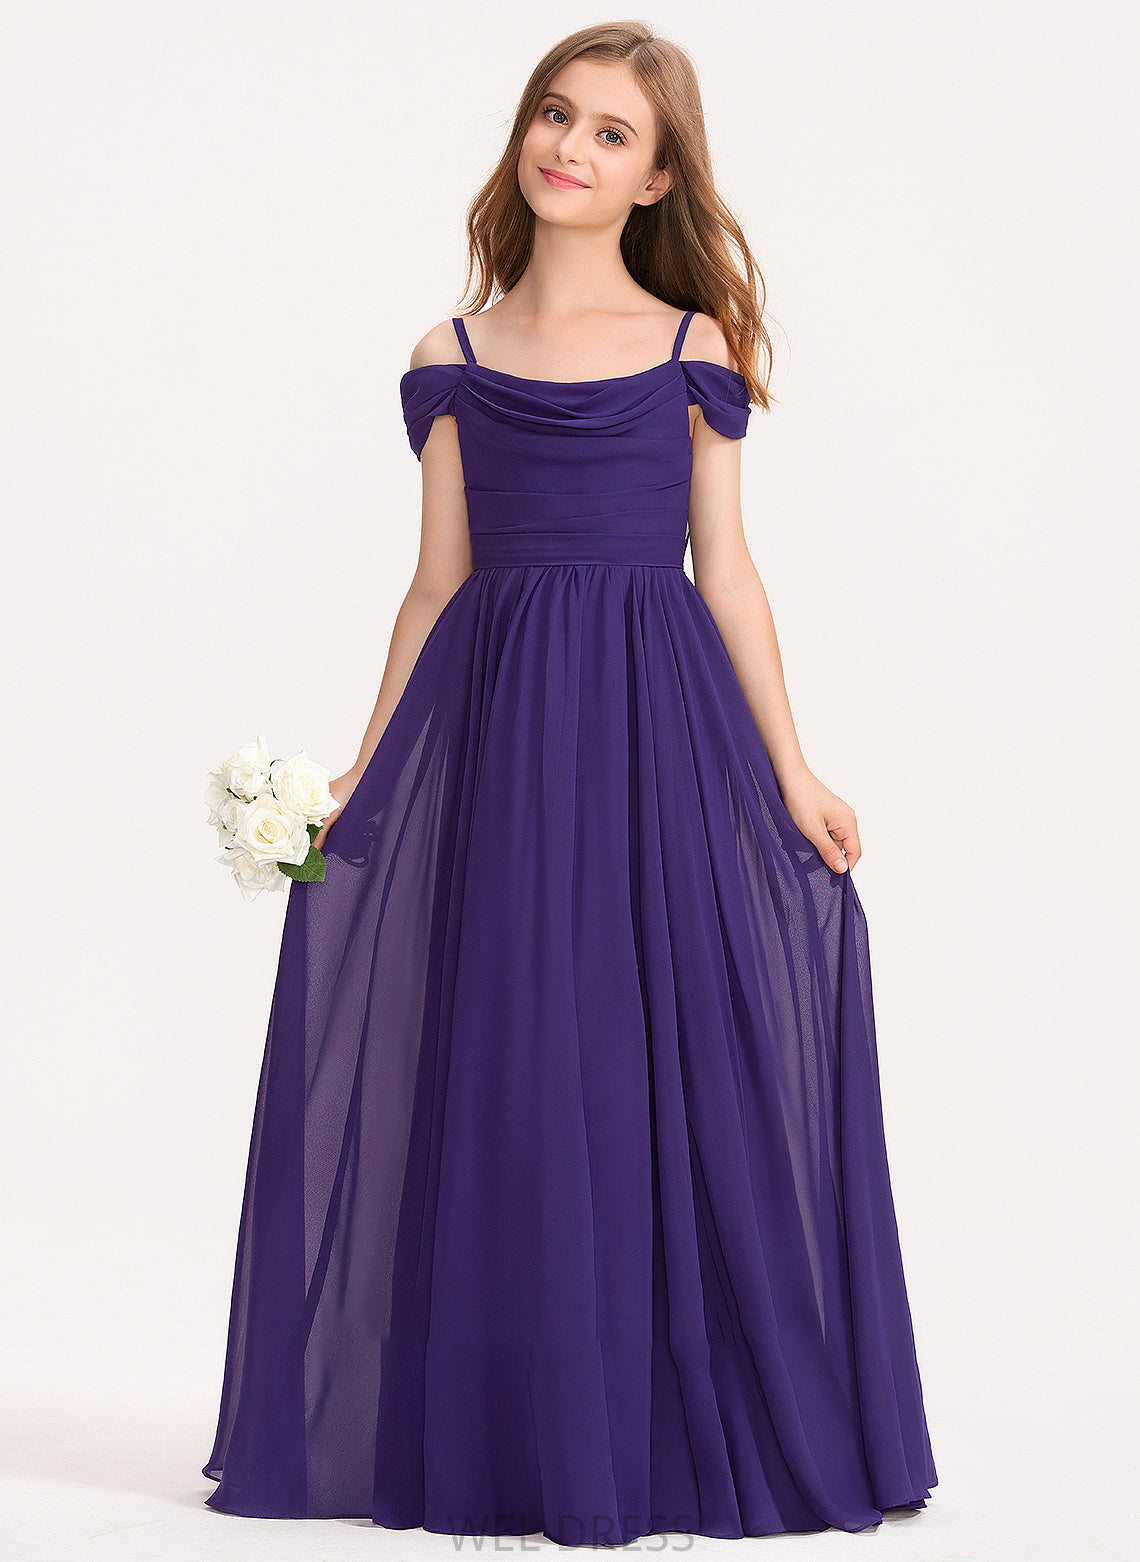 Zoey Junior Bridesmaid Dresses A-Line Ruffle Chiffon With Floor-Length Off-the-Shoulder